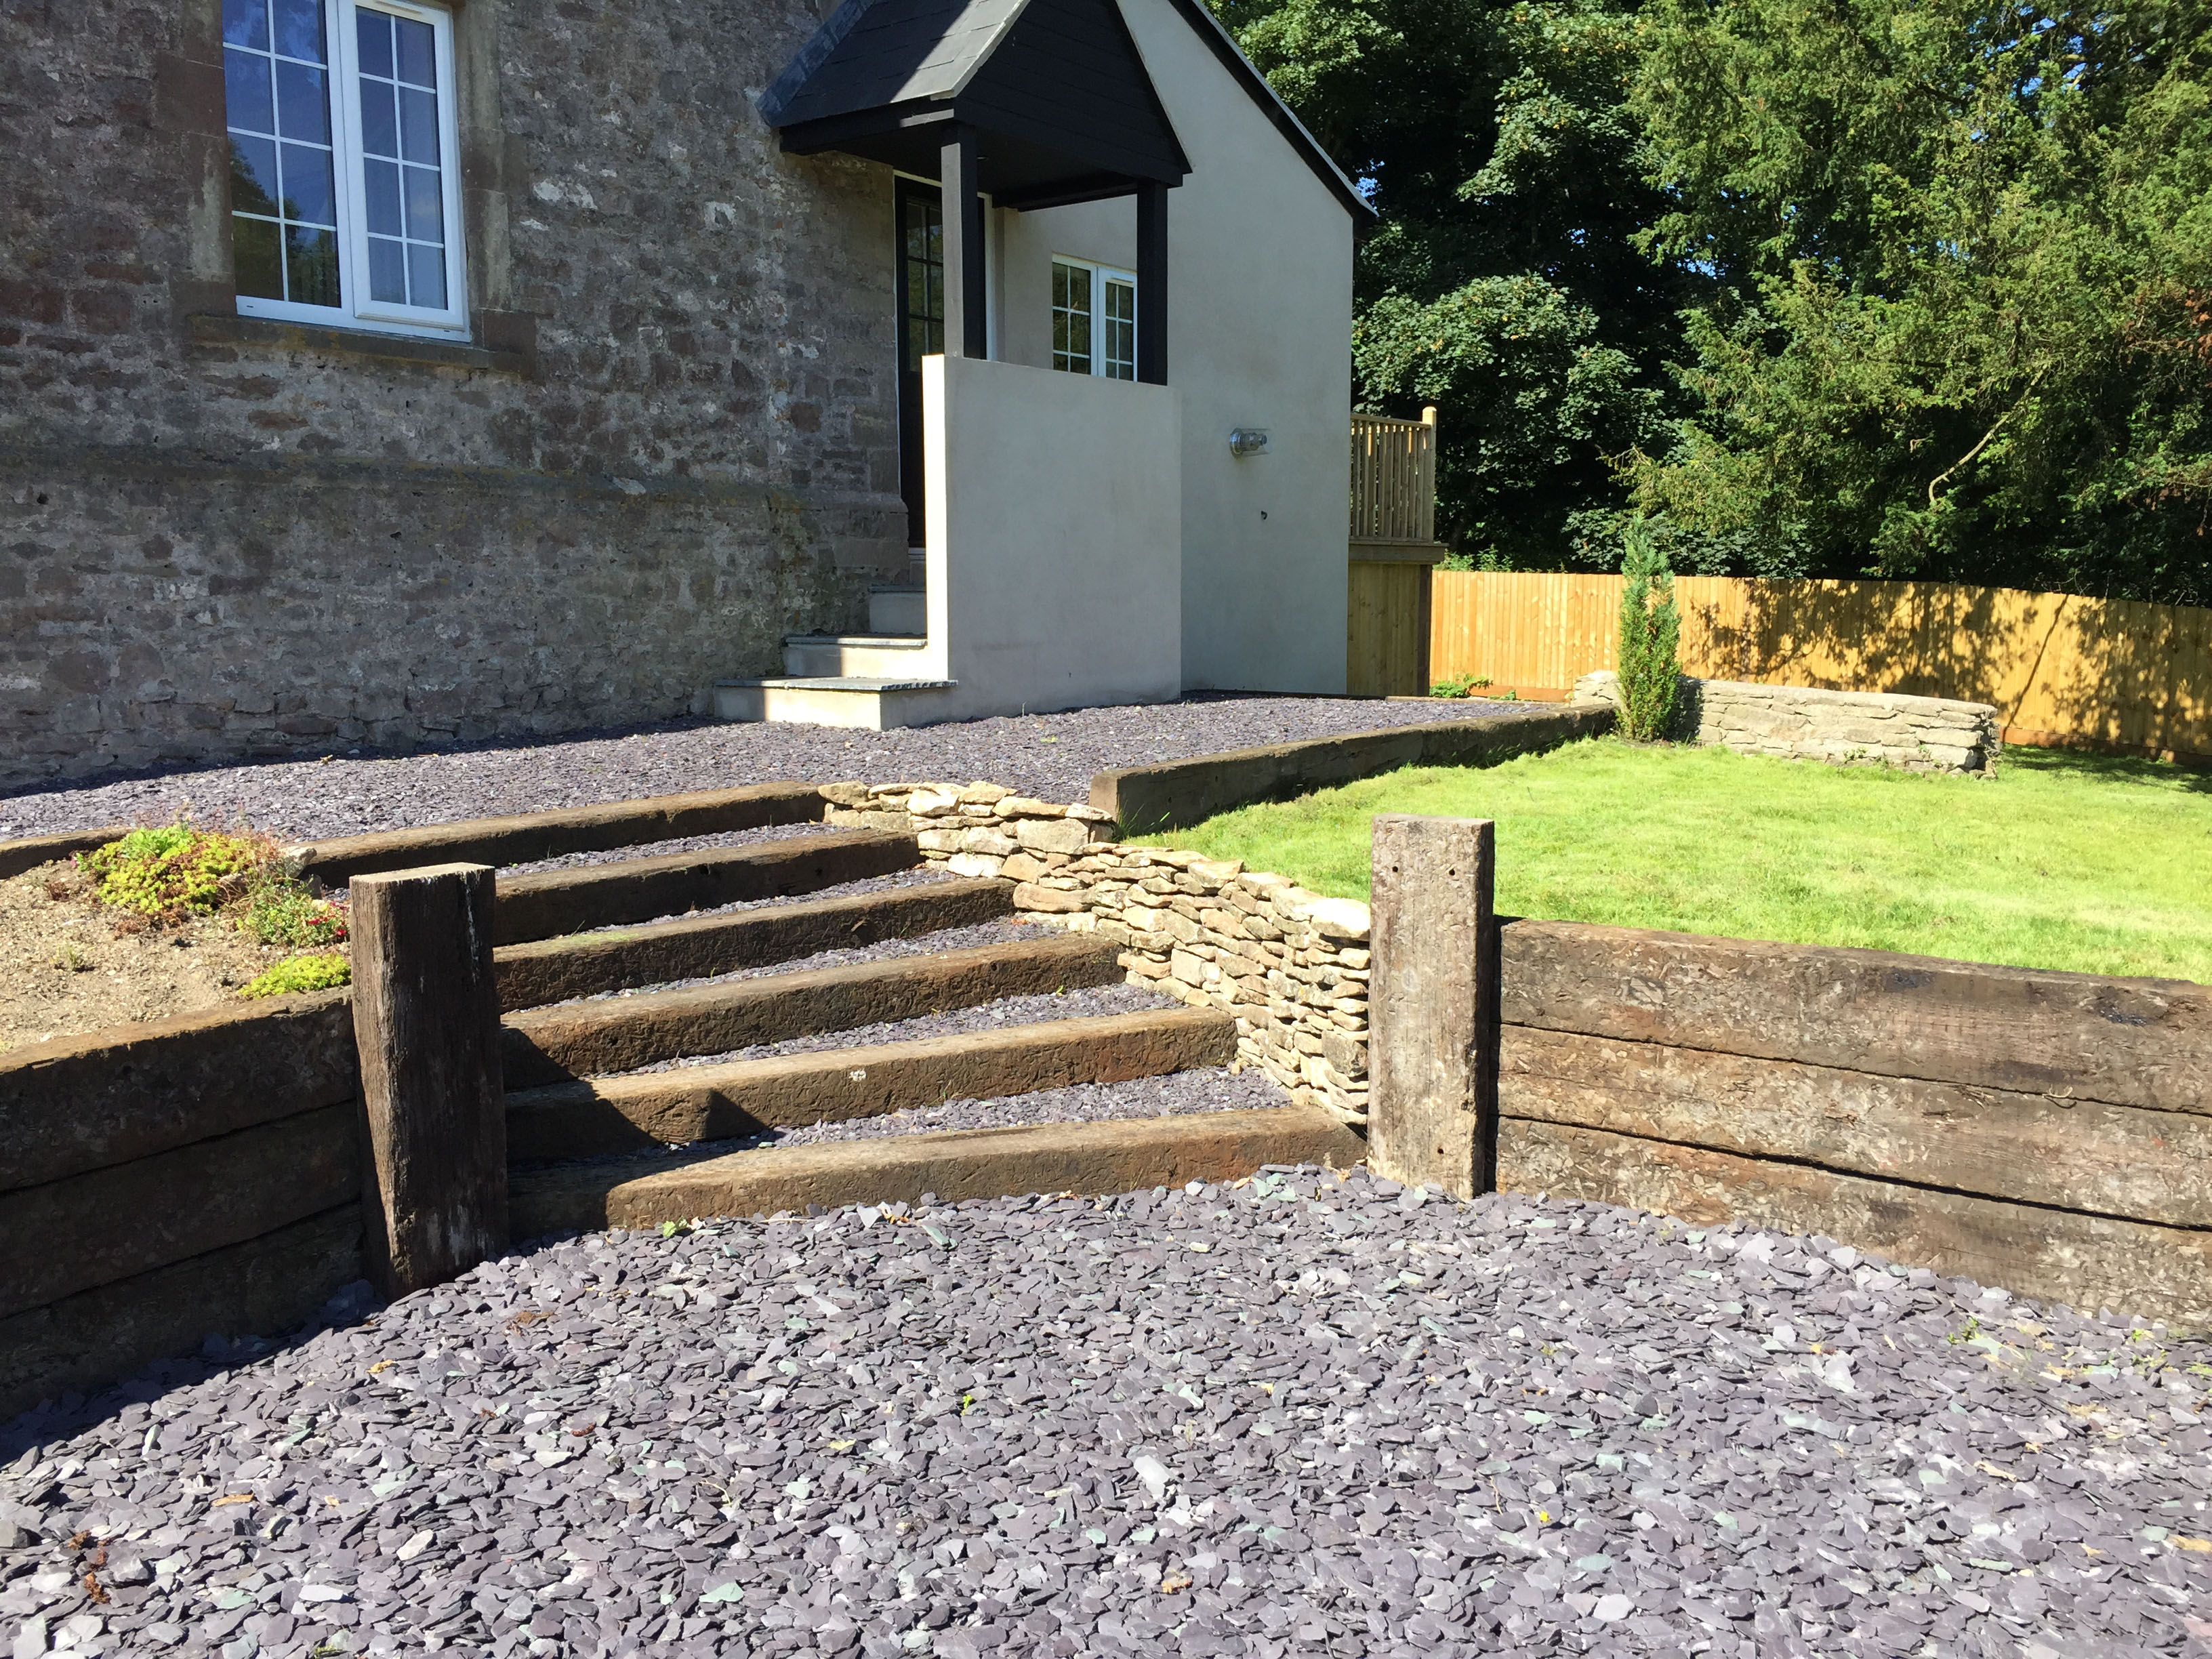 Cottage renovation with rear extension and stone driveway